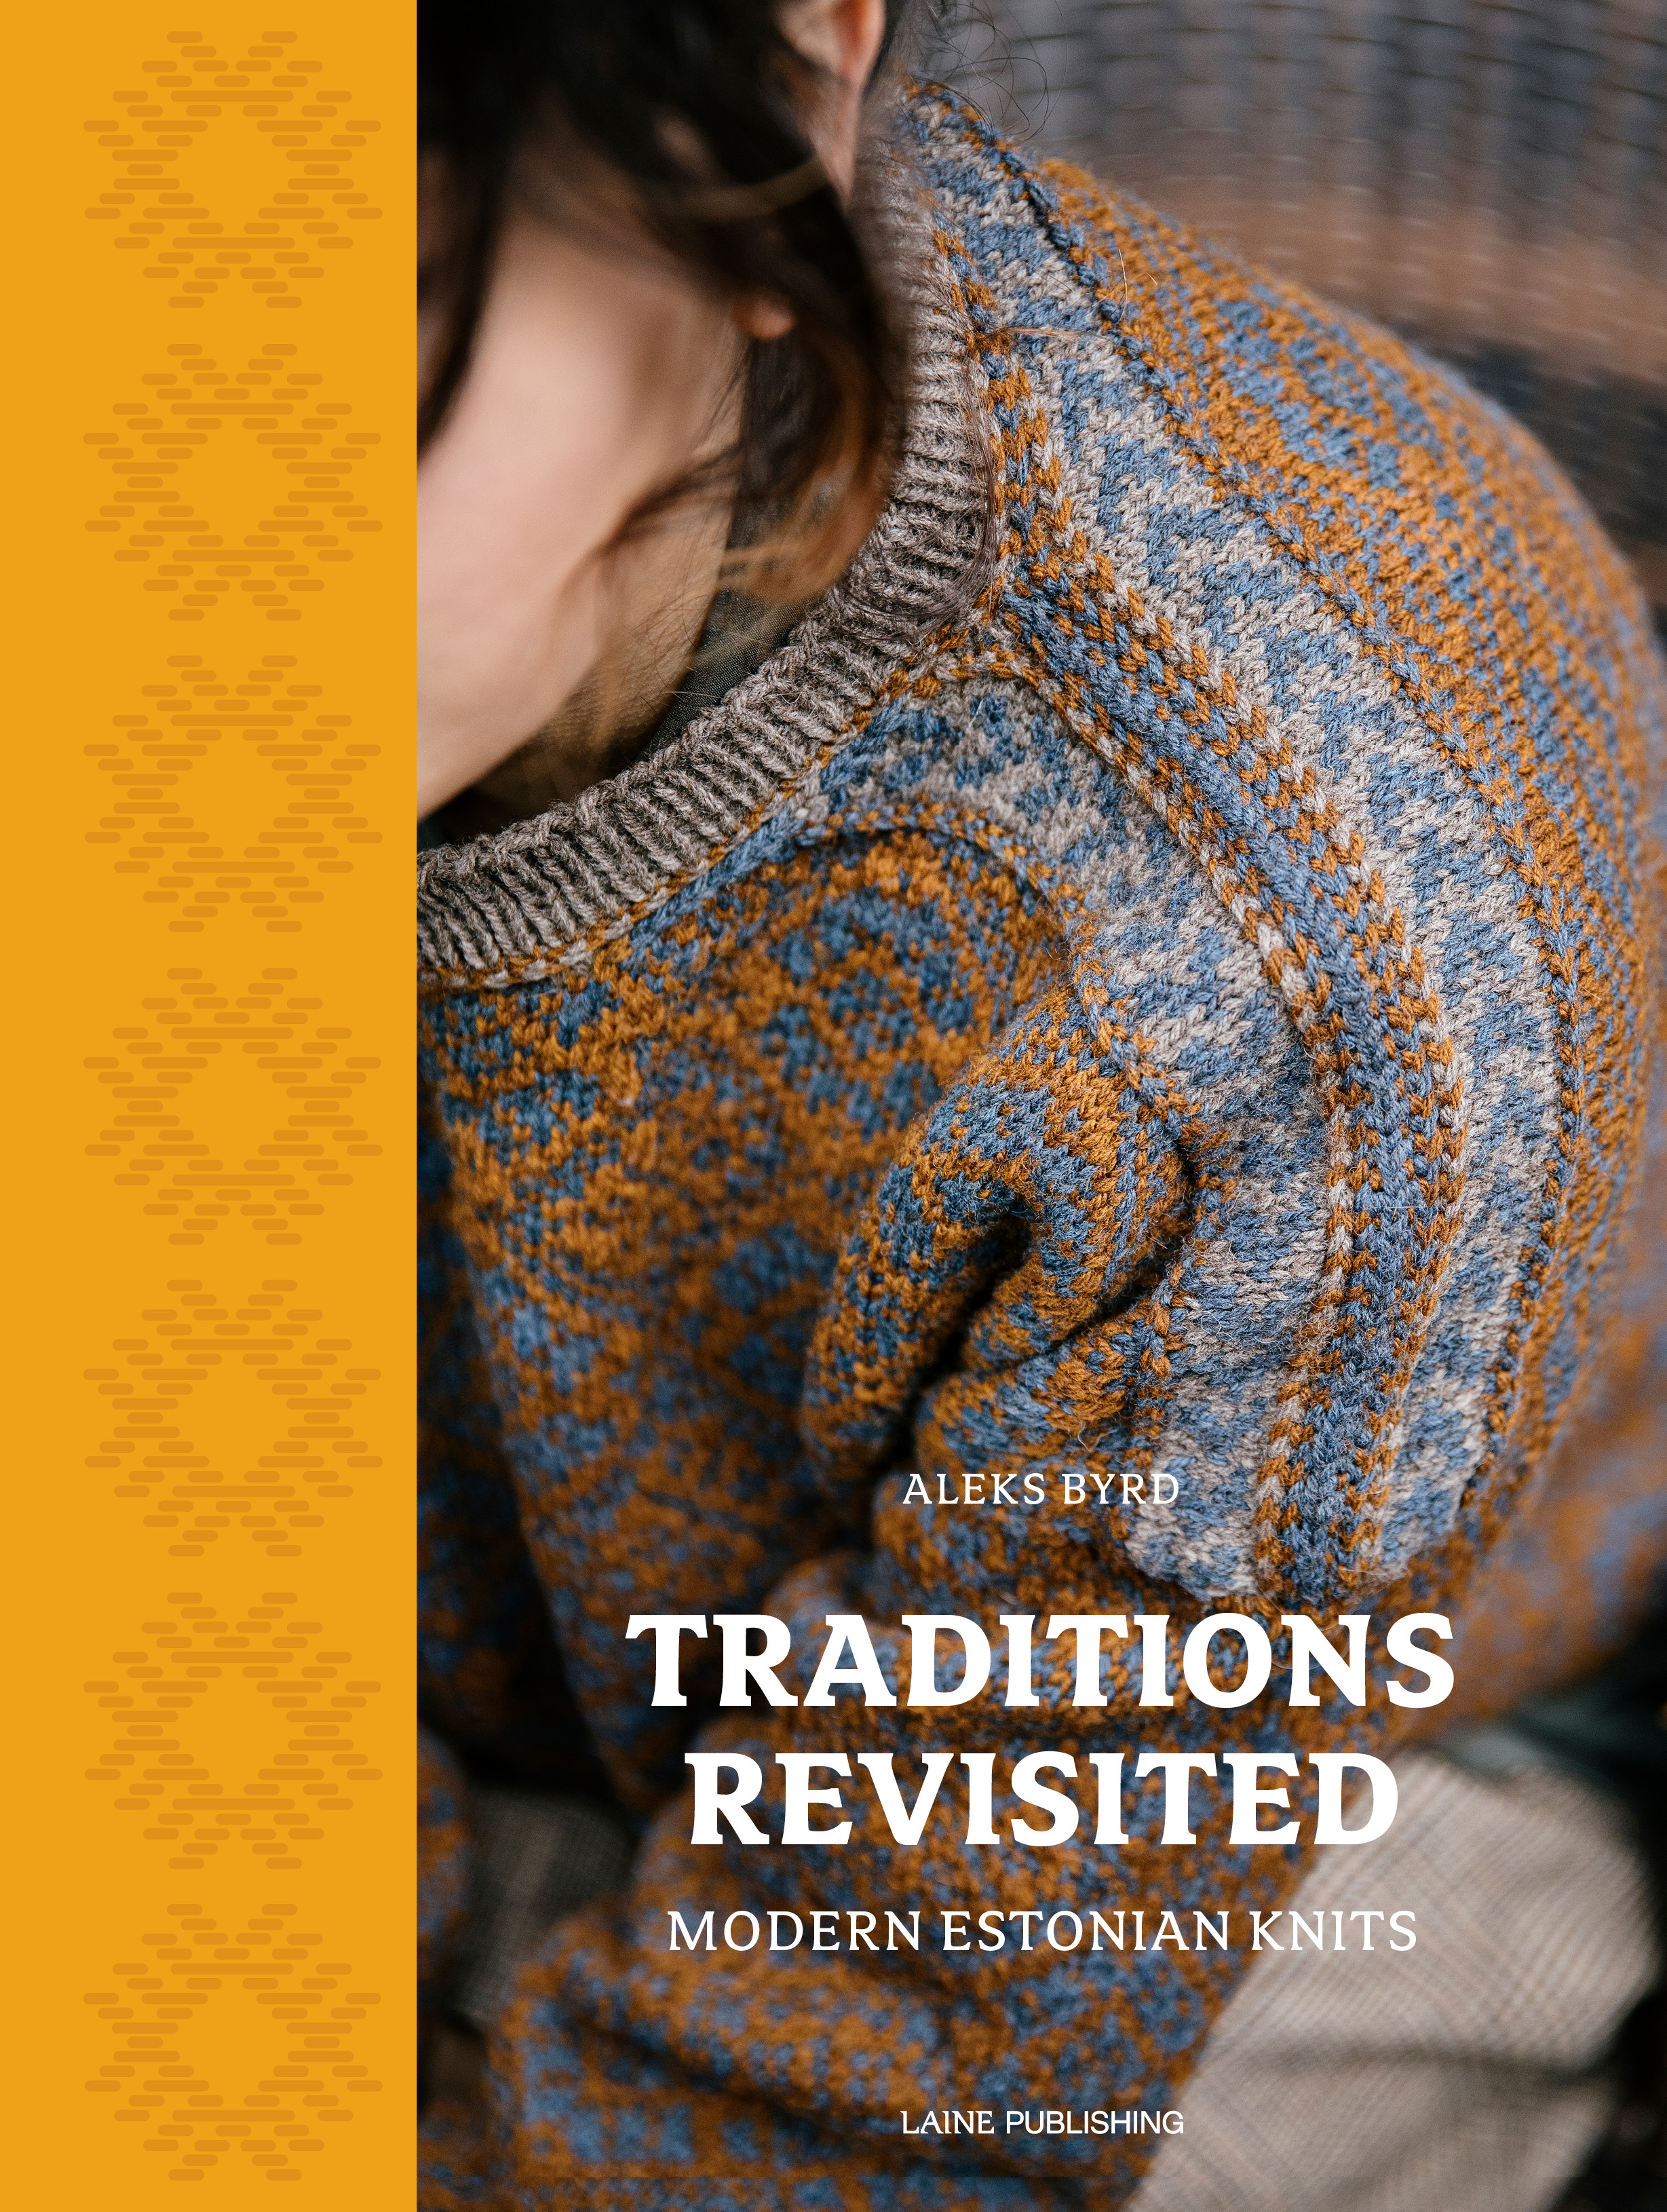 Aleks Byrd, „Traditions Revisited“, Englisch